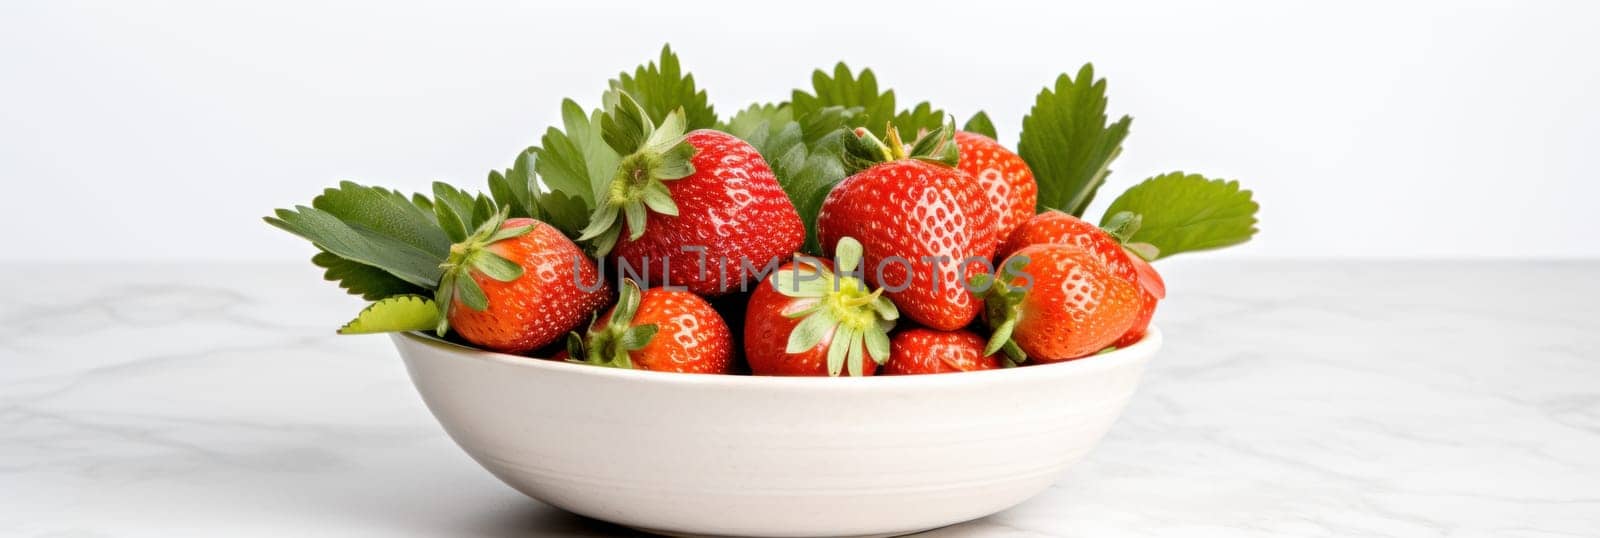 A white bowl filled with lots of ripe strawberries